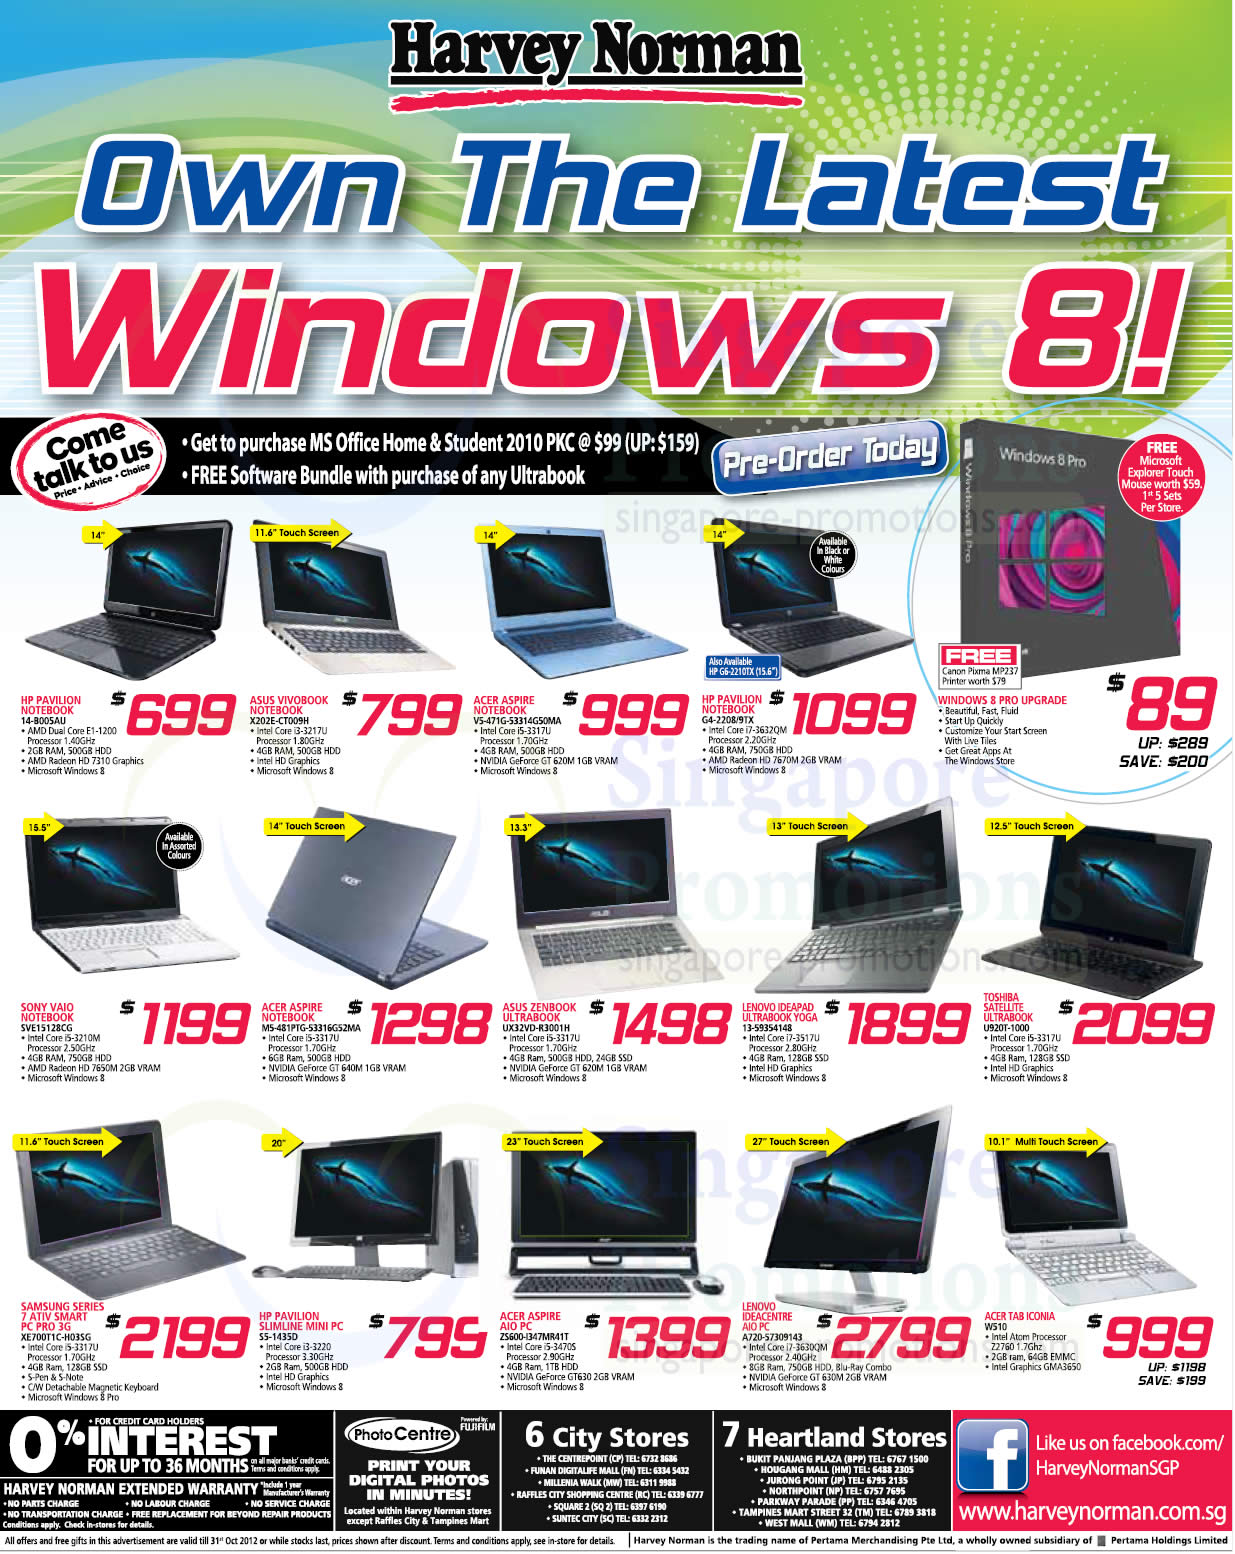 Featured image for Harvey Norman Windows 8 Tips, Notebook Offers & Philips Kitchenware Offers 25 - 31 Oct 2012